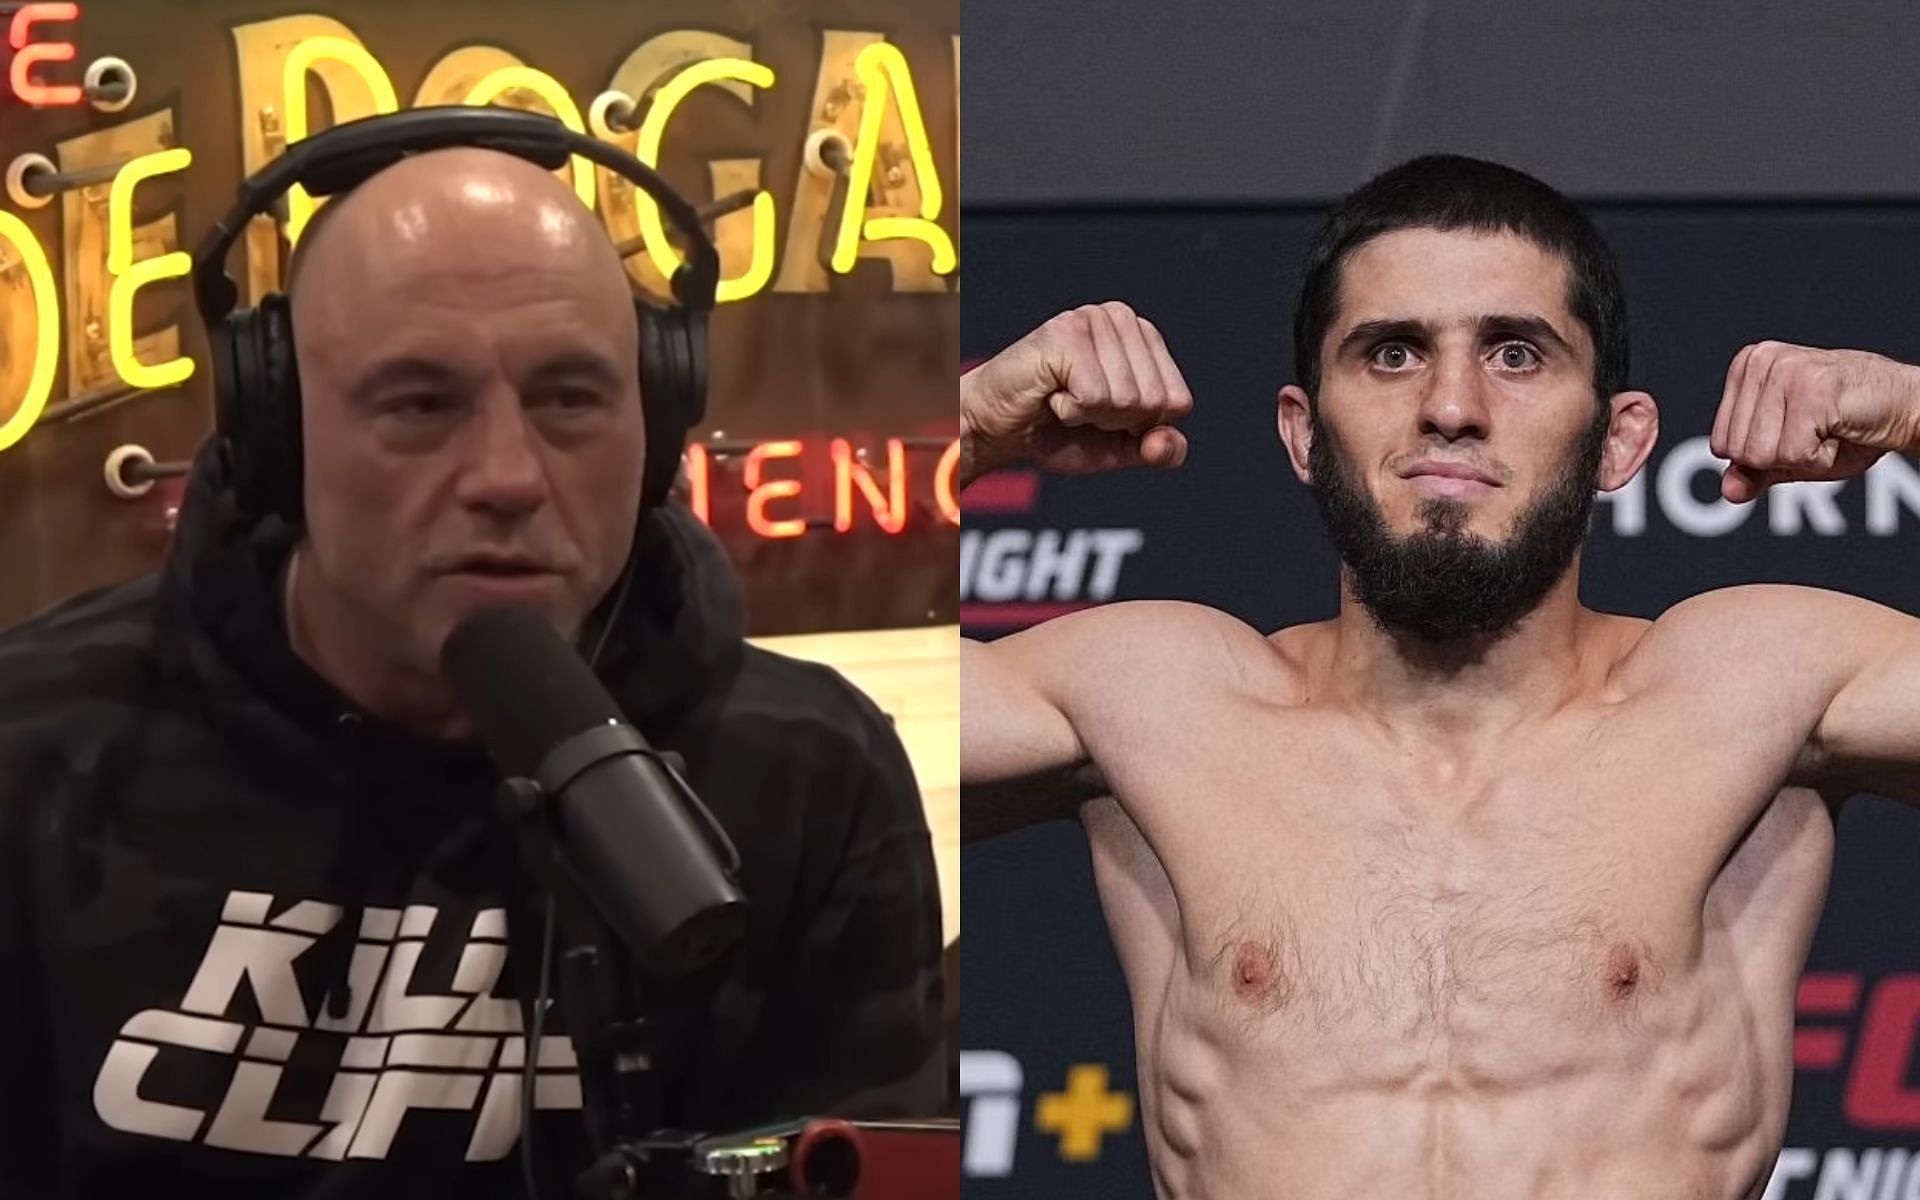 Joe Rogan (left), Islam Makhachev (right) [Images courtesy of PowerfulJRE on Youtube]